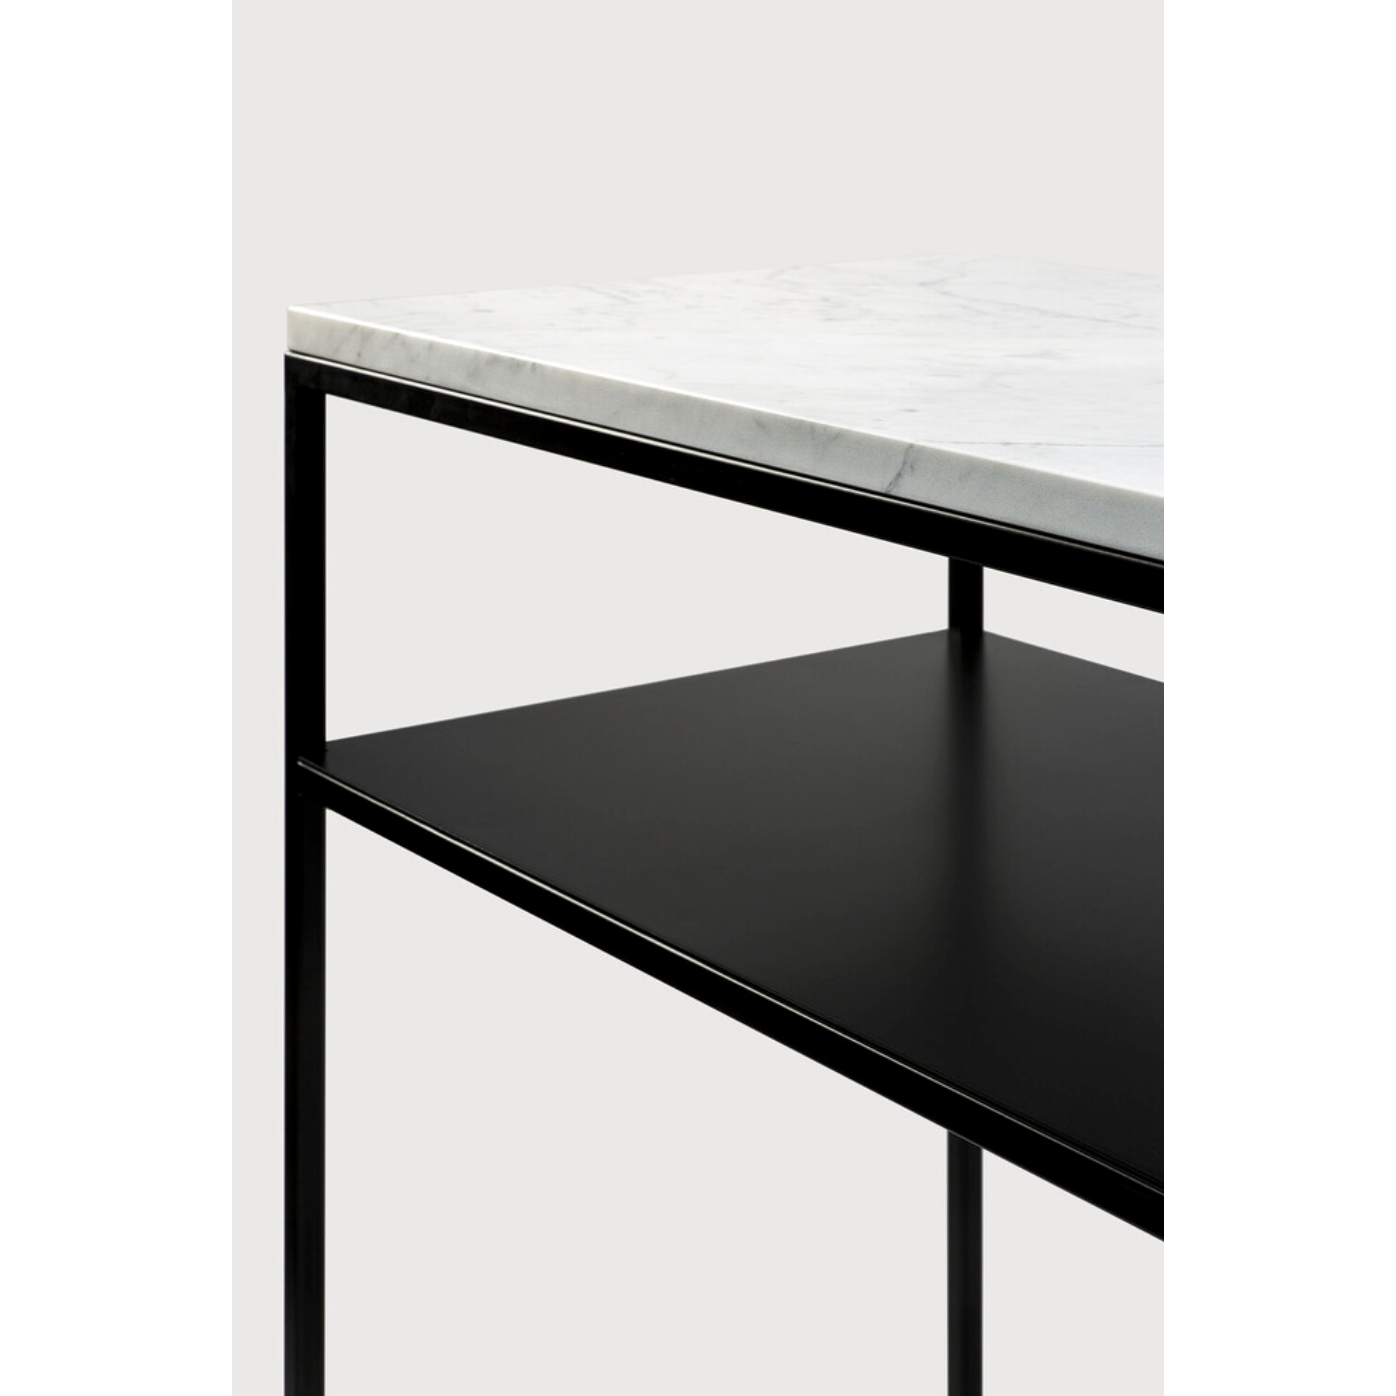  We love that the Stone console is an even mix of contemporary and glamorous elements bringing a touch of chic style to your entry way or living room. With its modern open metal frame and its pristine marble, we admire the simple lines and sleek design by designer, Djordje Cukanovic.  Dimensions: 47.5"w x 16"d x 34"h  Weight: 91 lbs  Material: Marble top, black metal frame